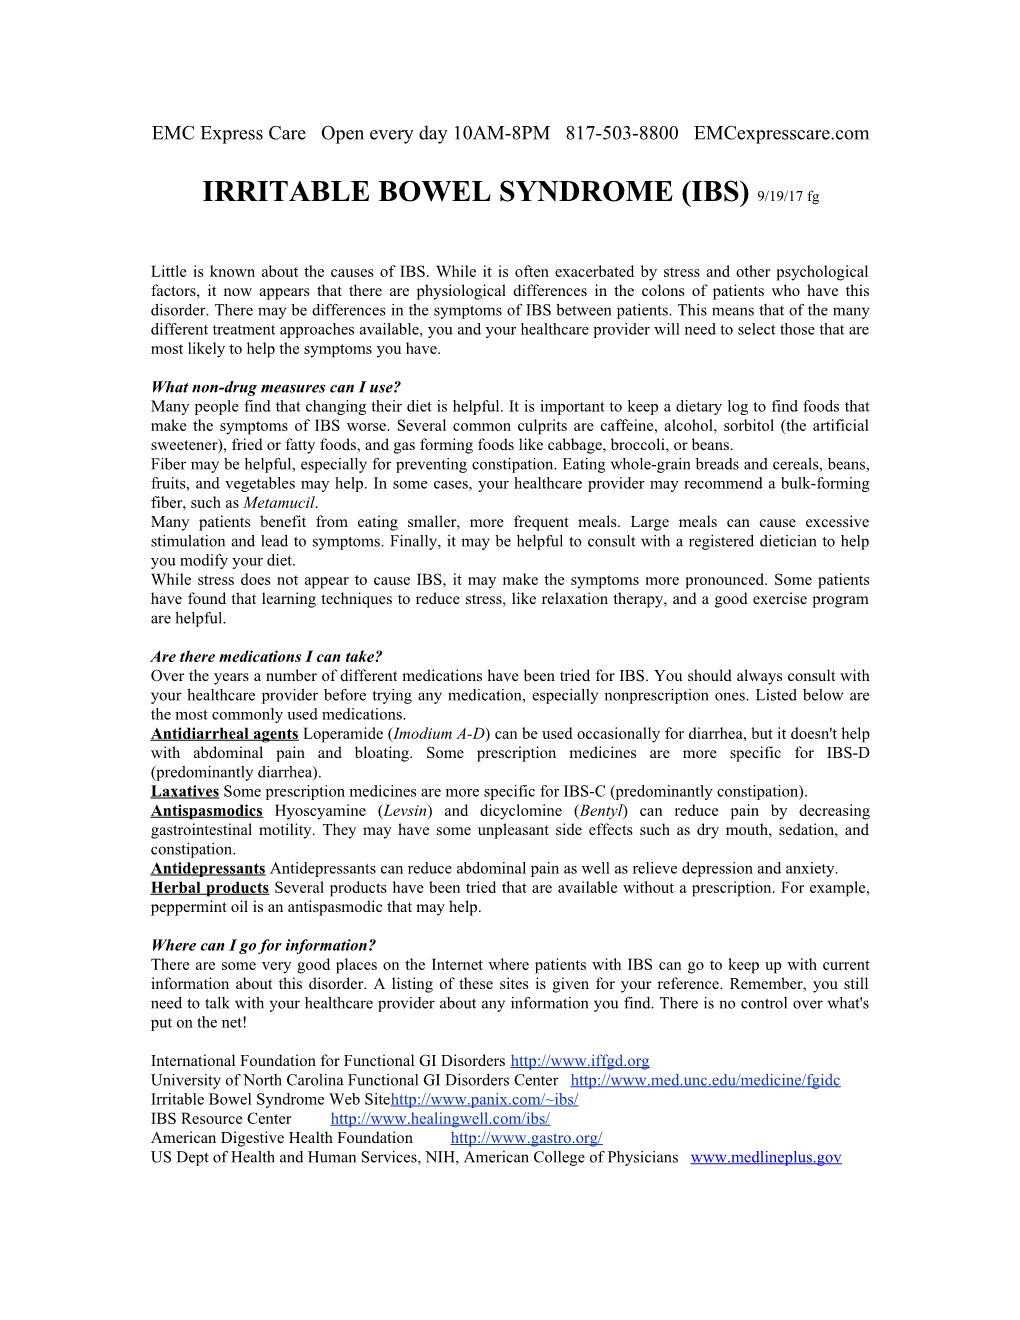 Information for Patients with Irritable Bowel Syndrome (IBS)